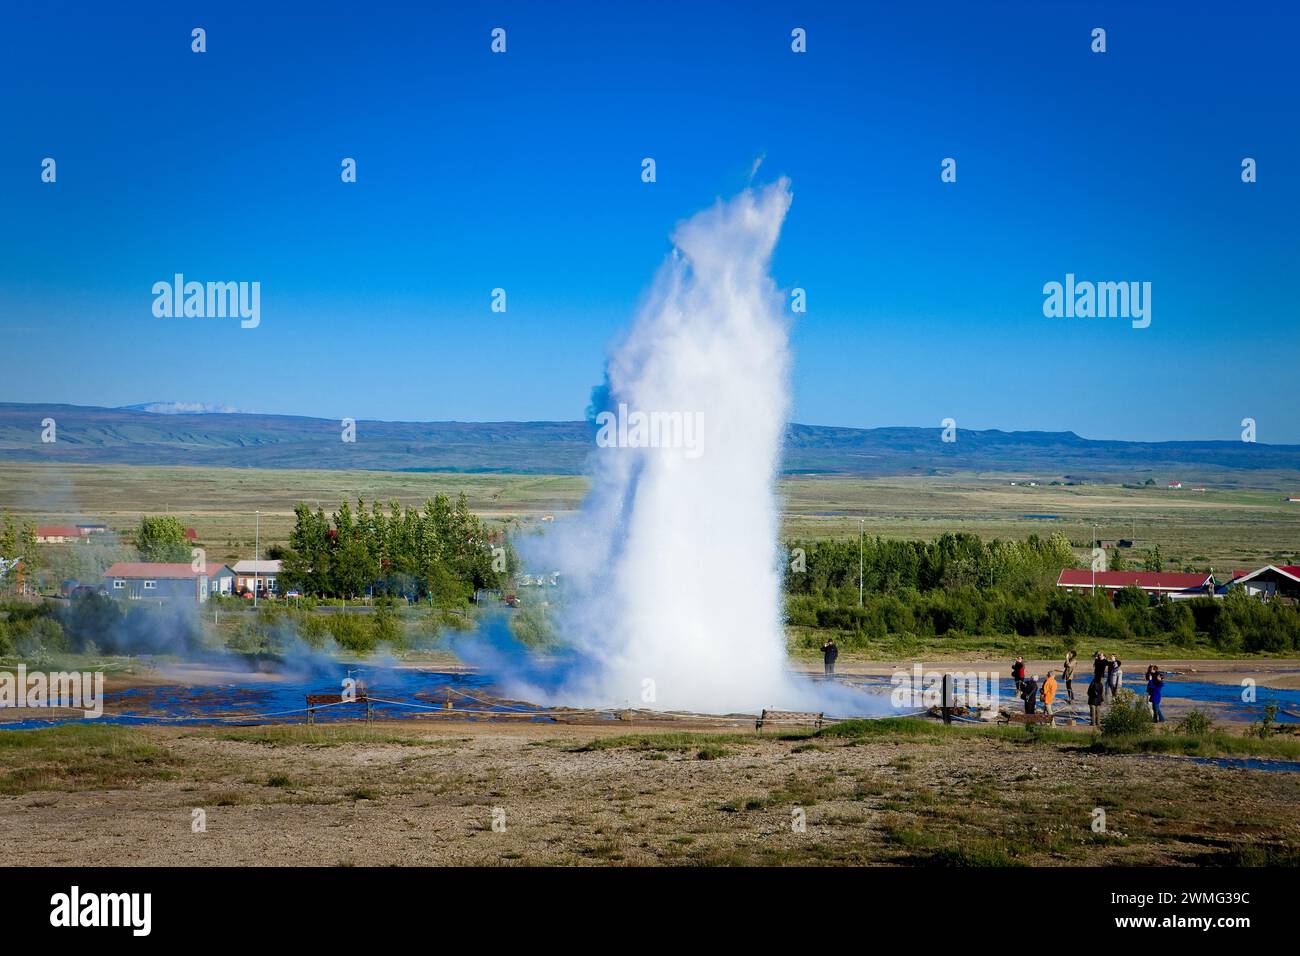 A geyser in a field with old faithful in the background Stock Photo